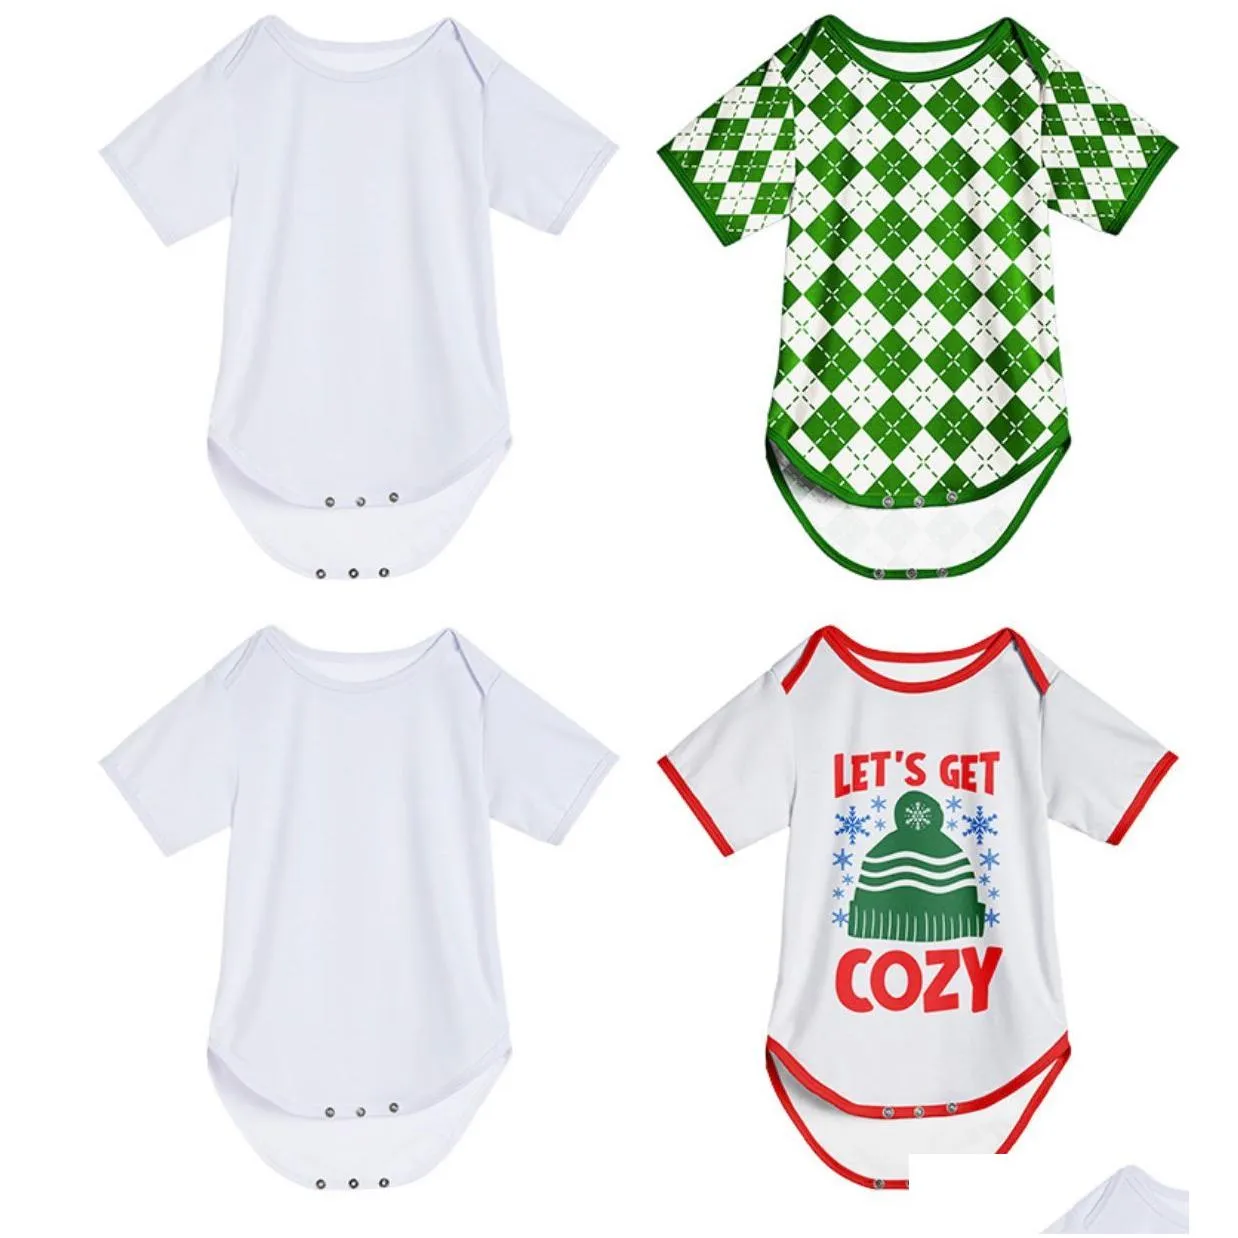 sublimation white baby onsies party supplies blank heat transfer cotton feel baby clothing diy parent-child clothes 0-24 months